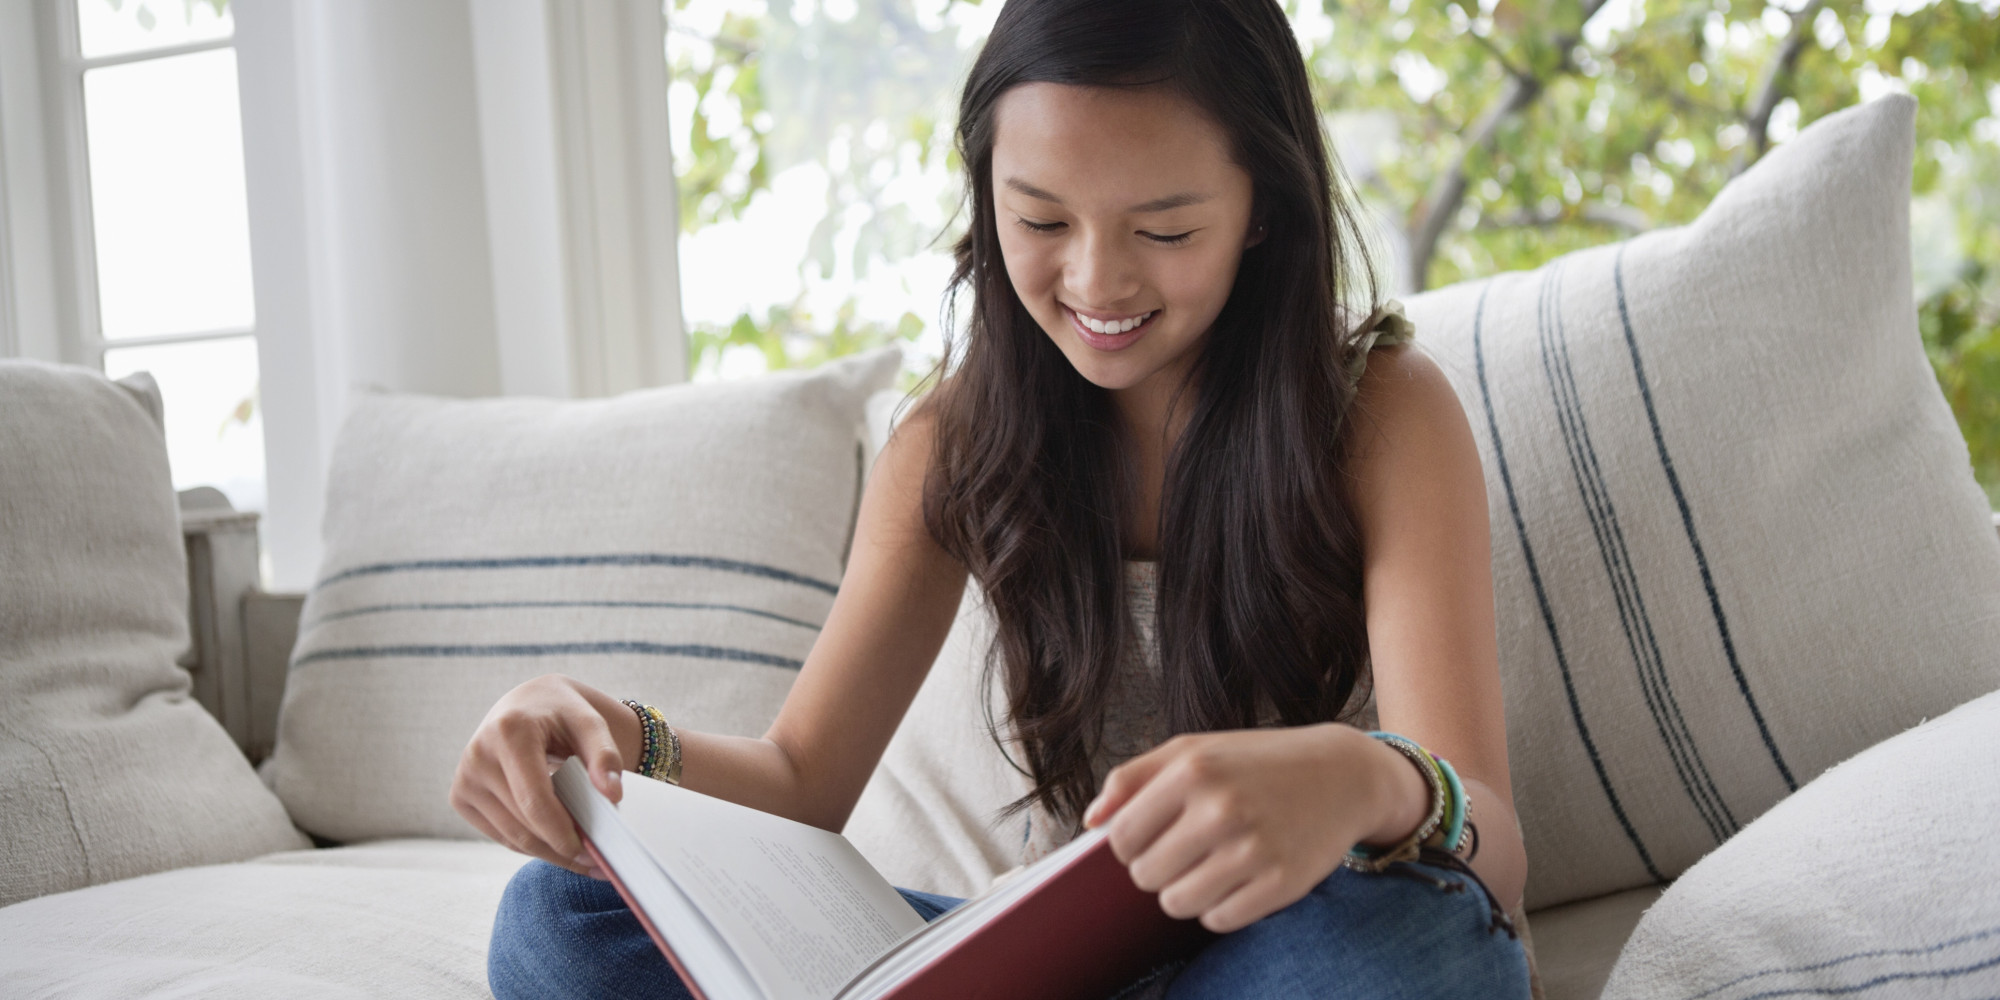 Read young adult books online for free